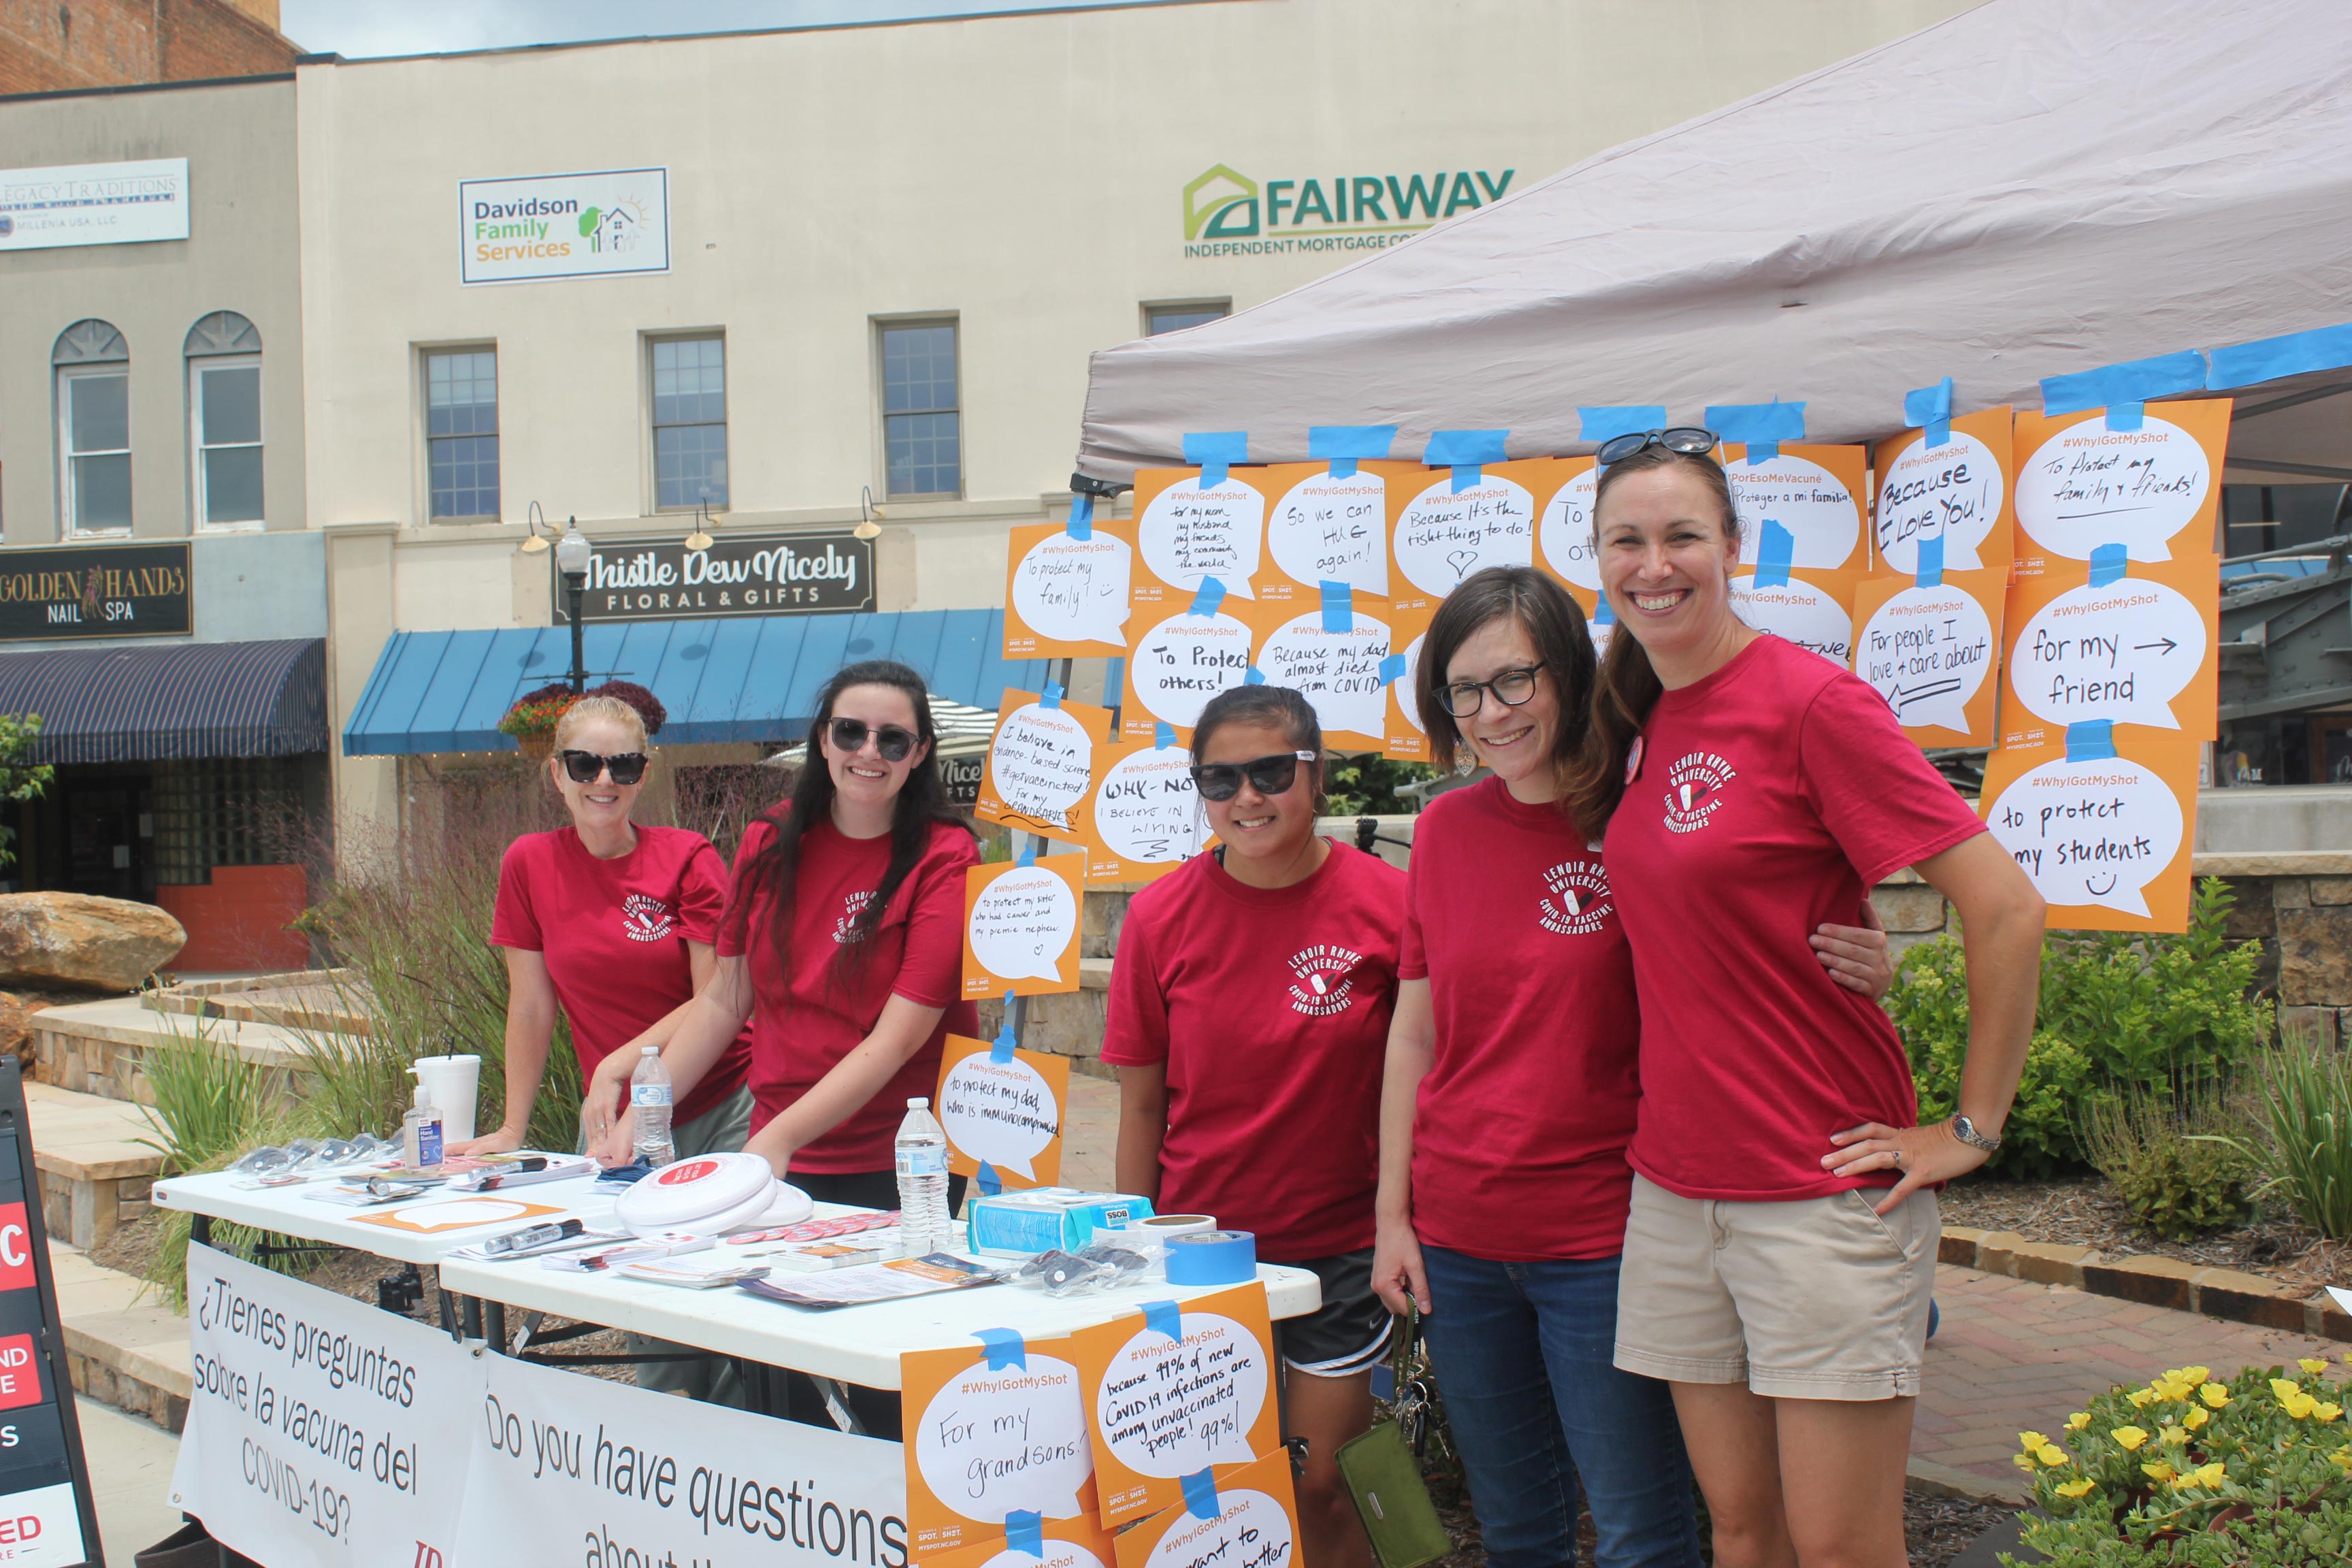 Taylor Newton, Ph.D., far right, stands with a group of student volunteers at an outdoor event